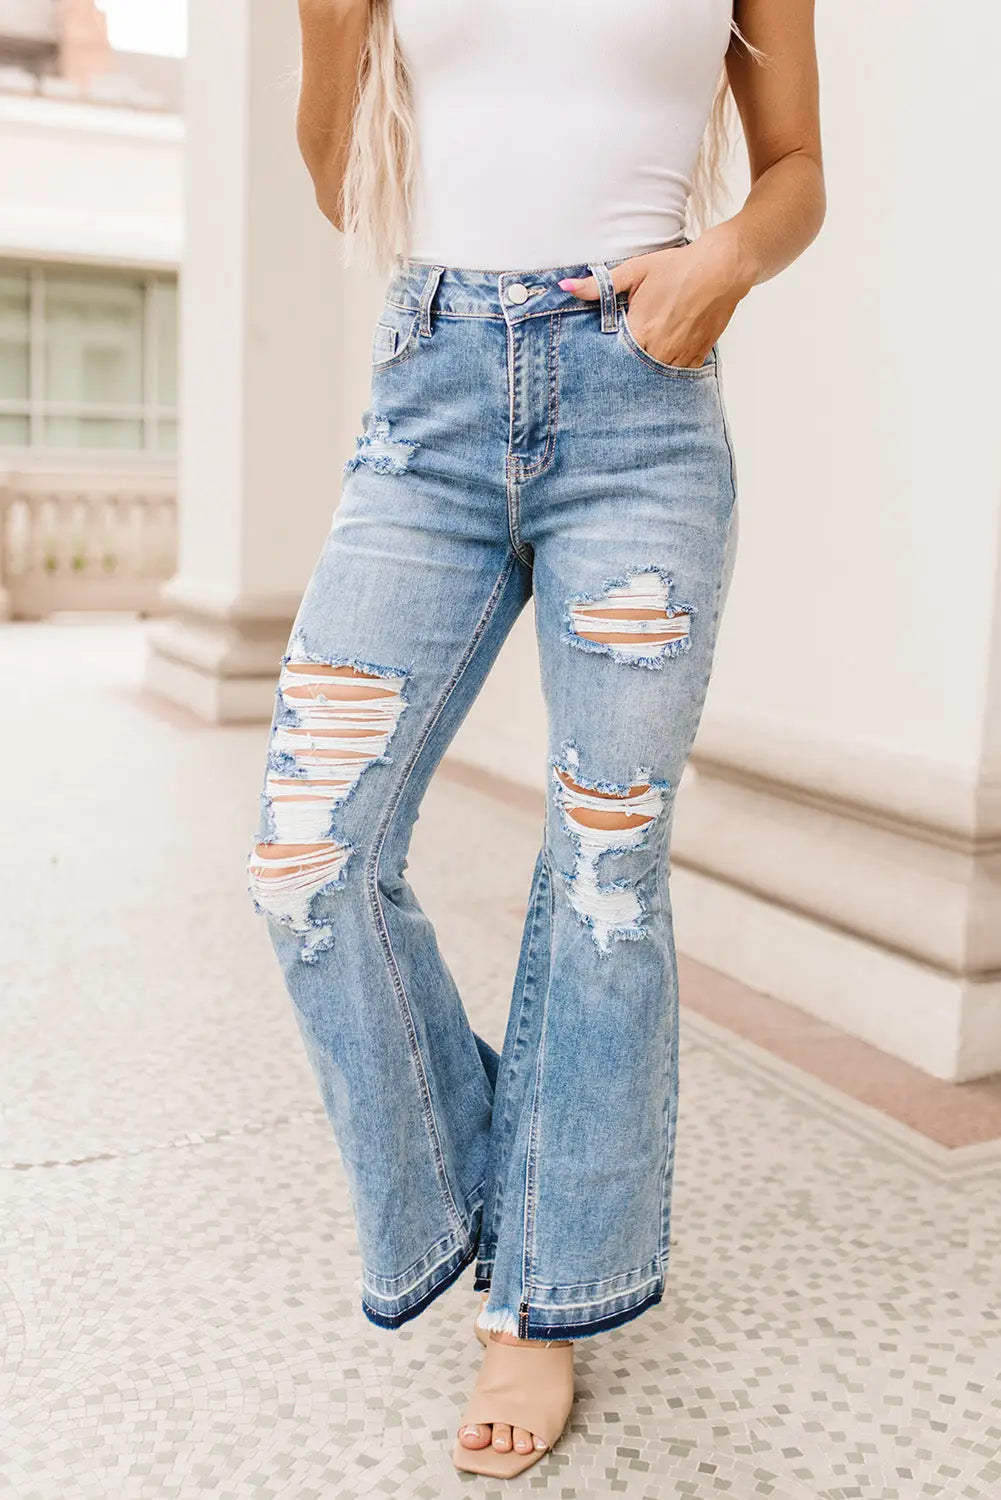 Sky blue light wash distressed high rise flare jeans - 6 / 93% cotton + 5% polyester + 2% elastane